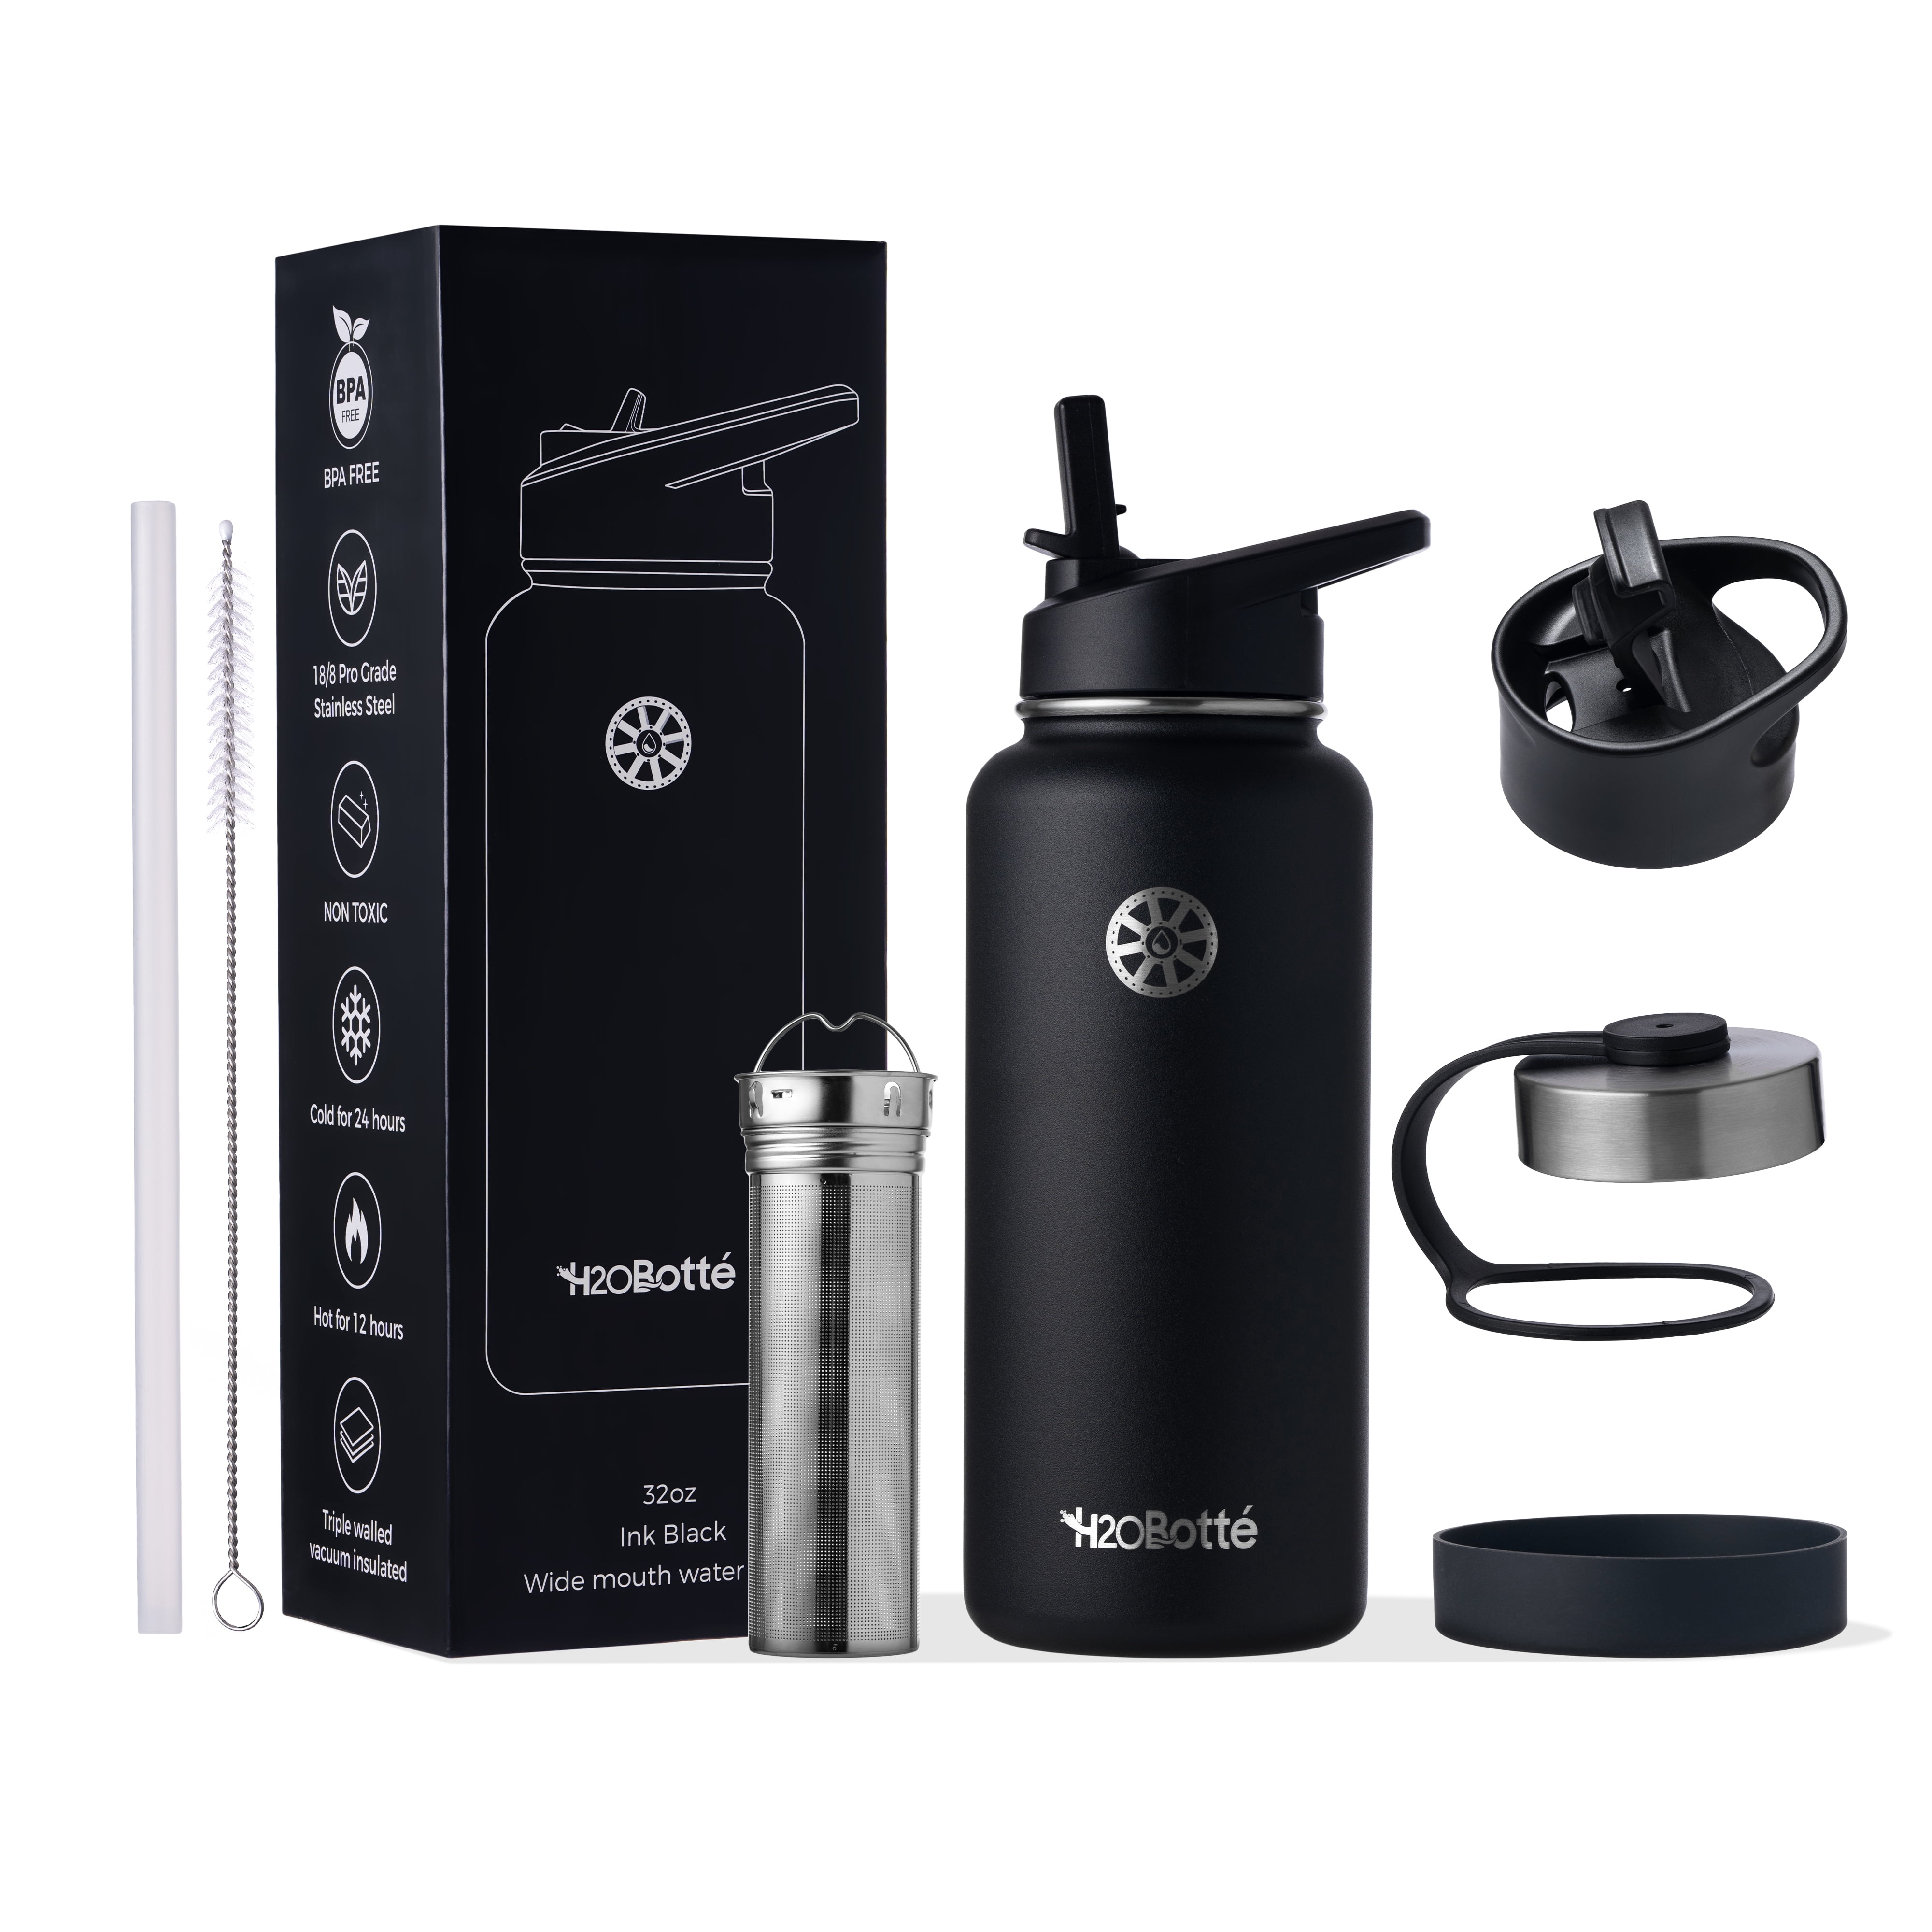 Nurich Water Bottle - Stainless Steel & Vacuum Insulated - Wide Mouth with Leak Proof Flex Cap - 18 oz, Black